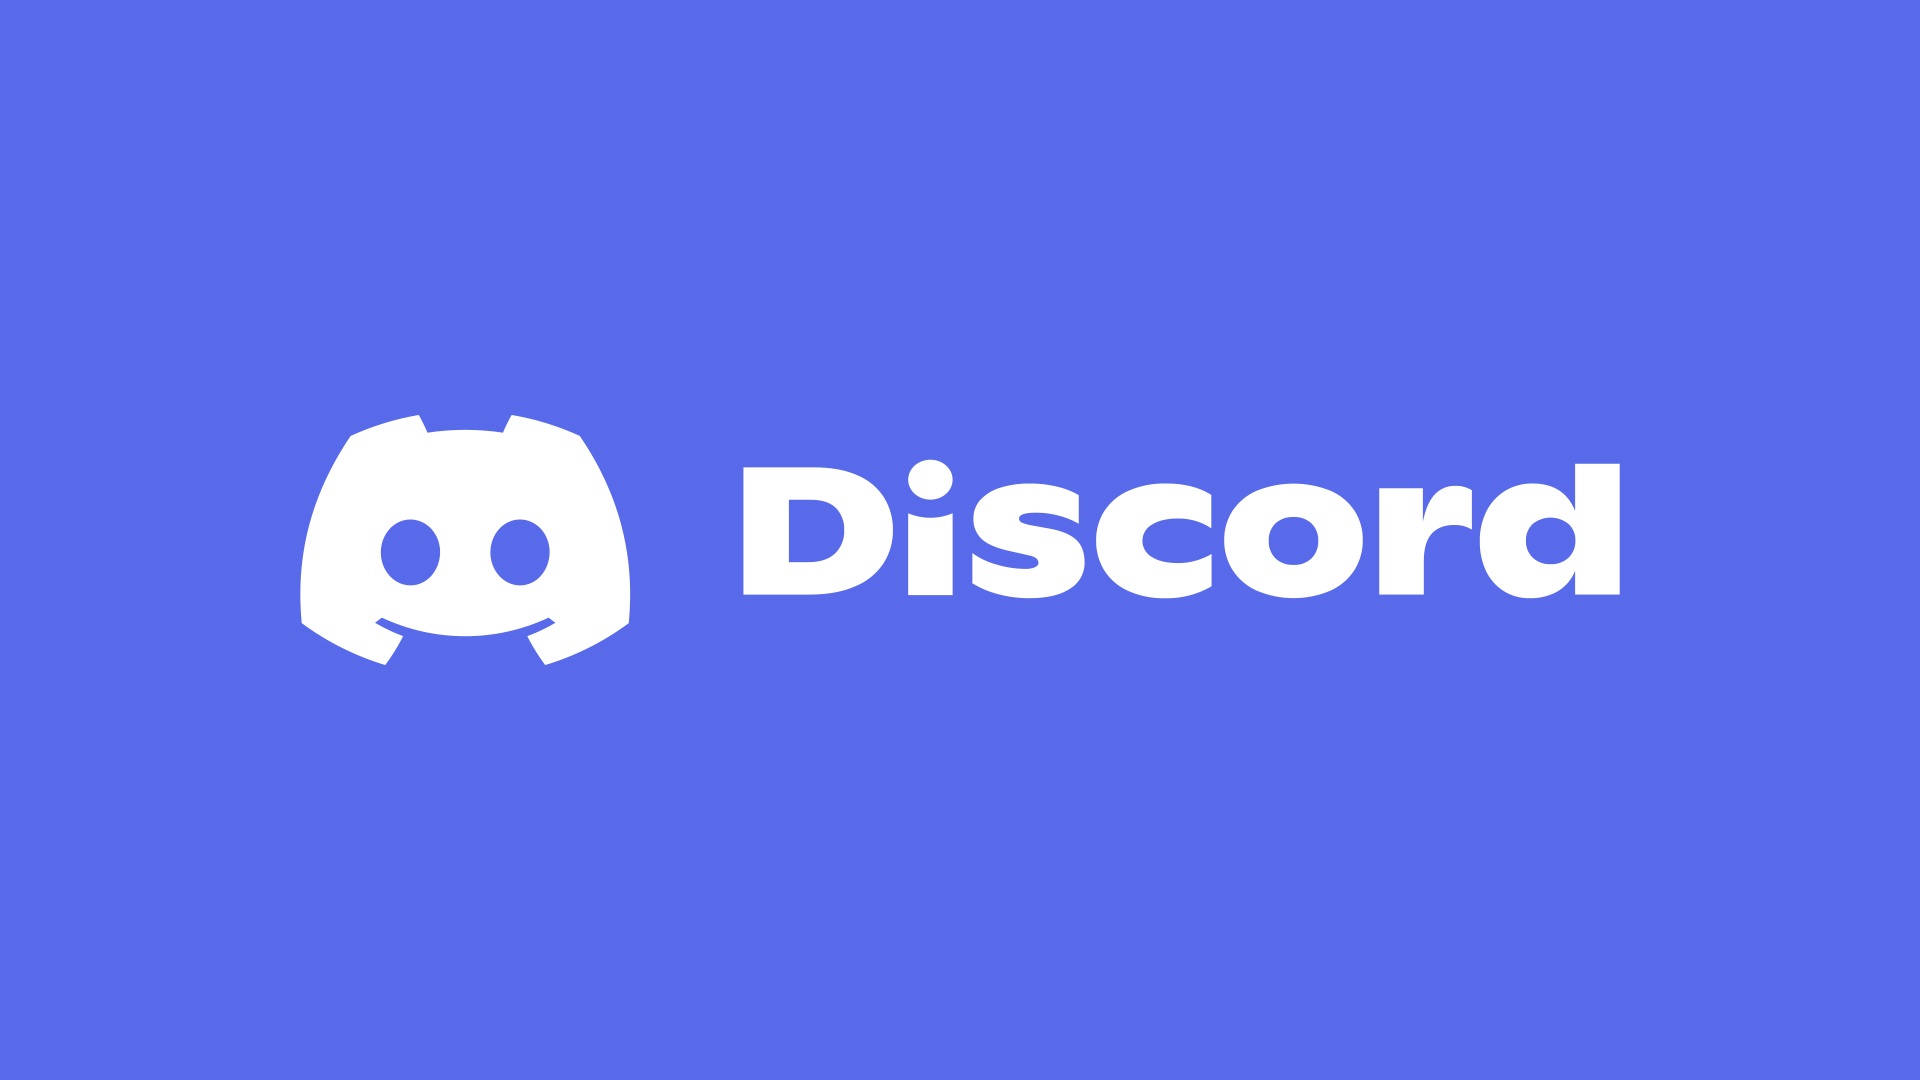 Discord users have beef with its new logo